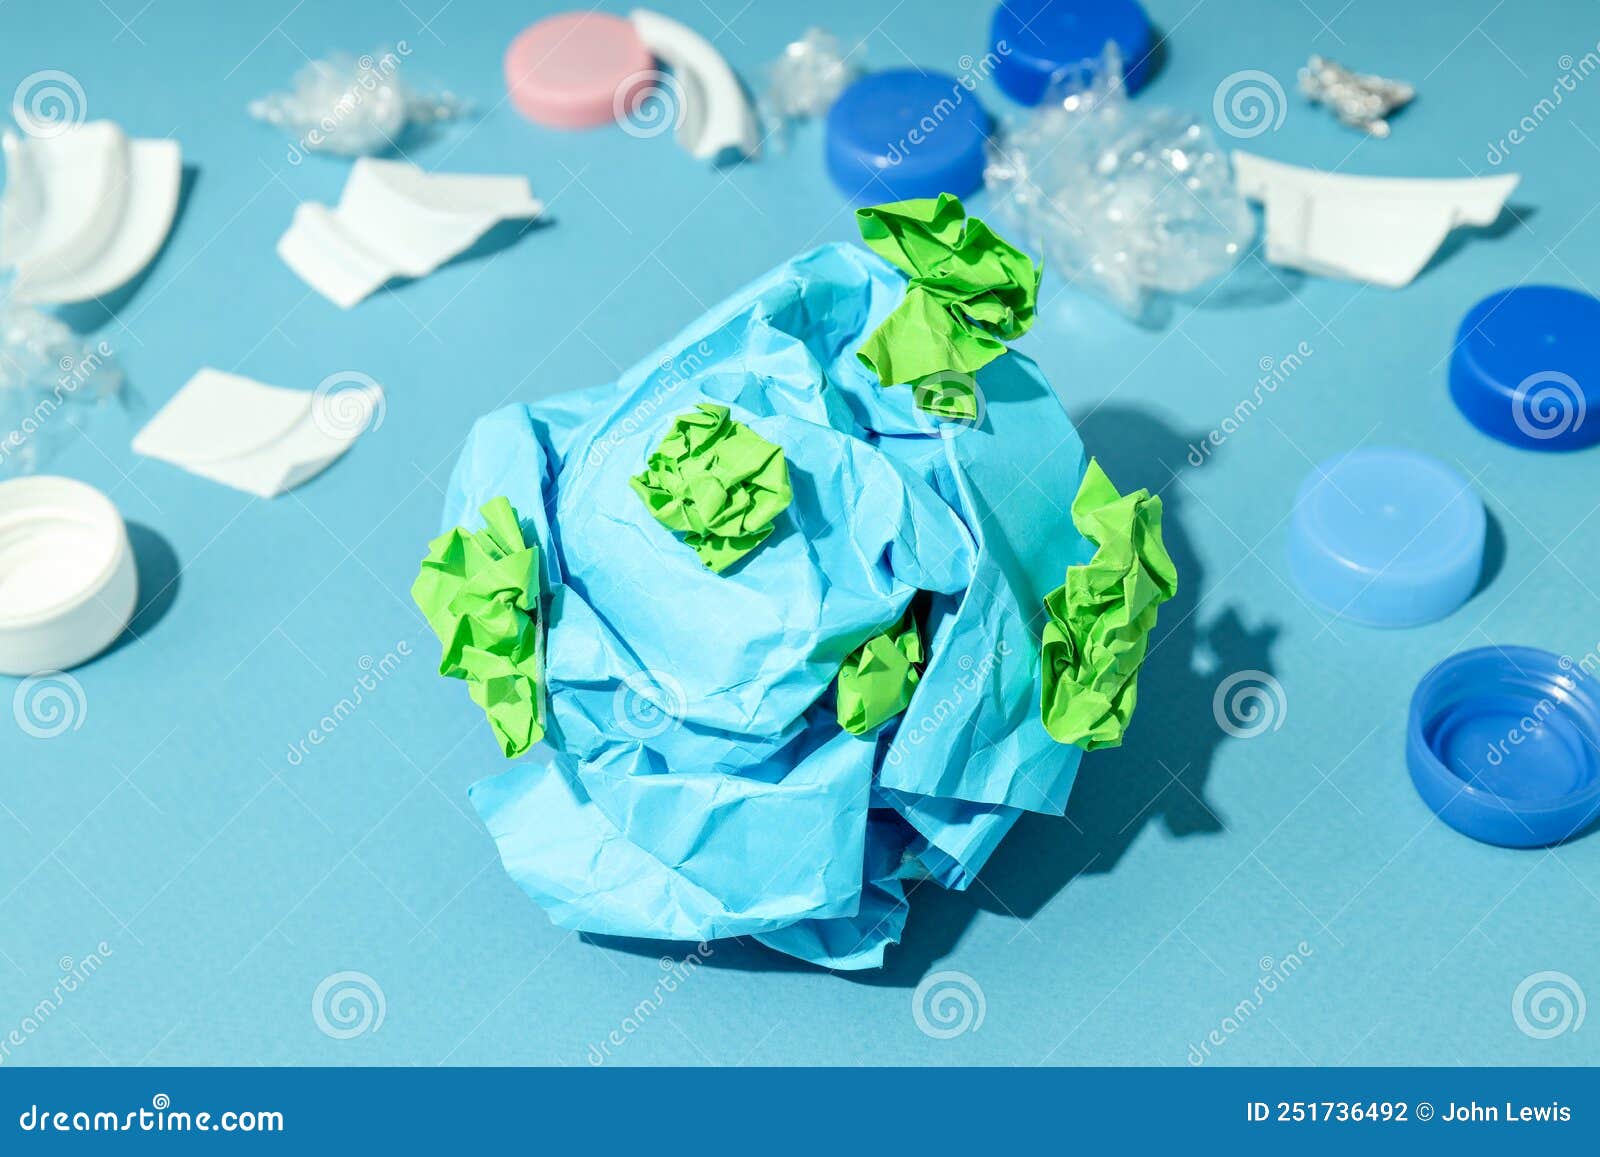 Concept of Save the World and Recycling Stock Photo Image of blue